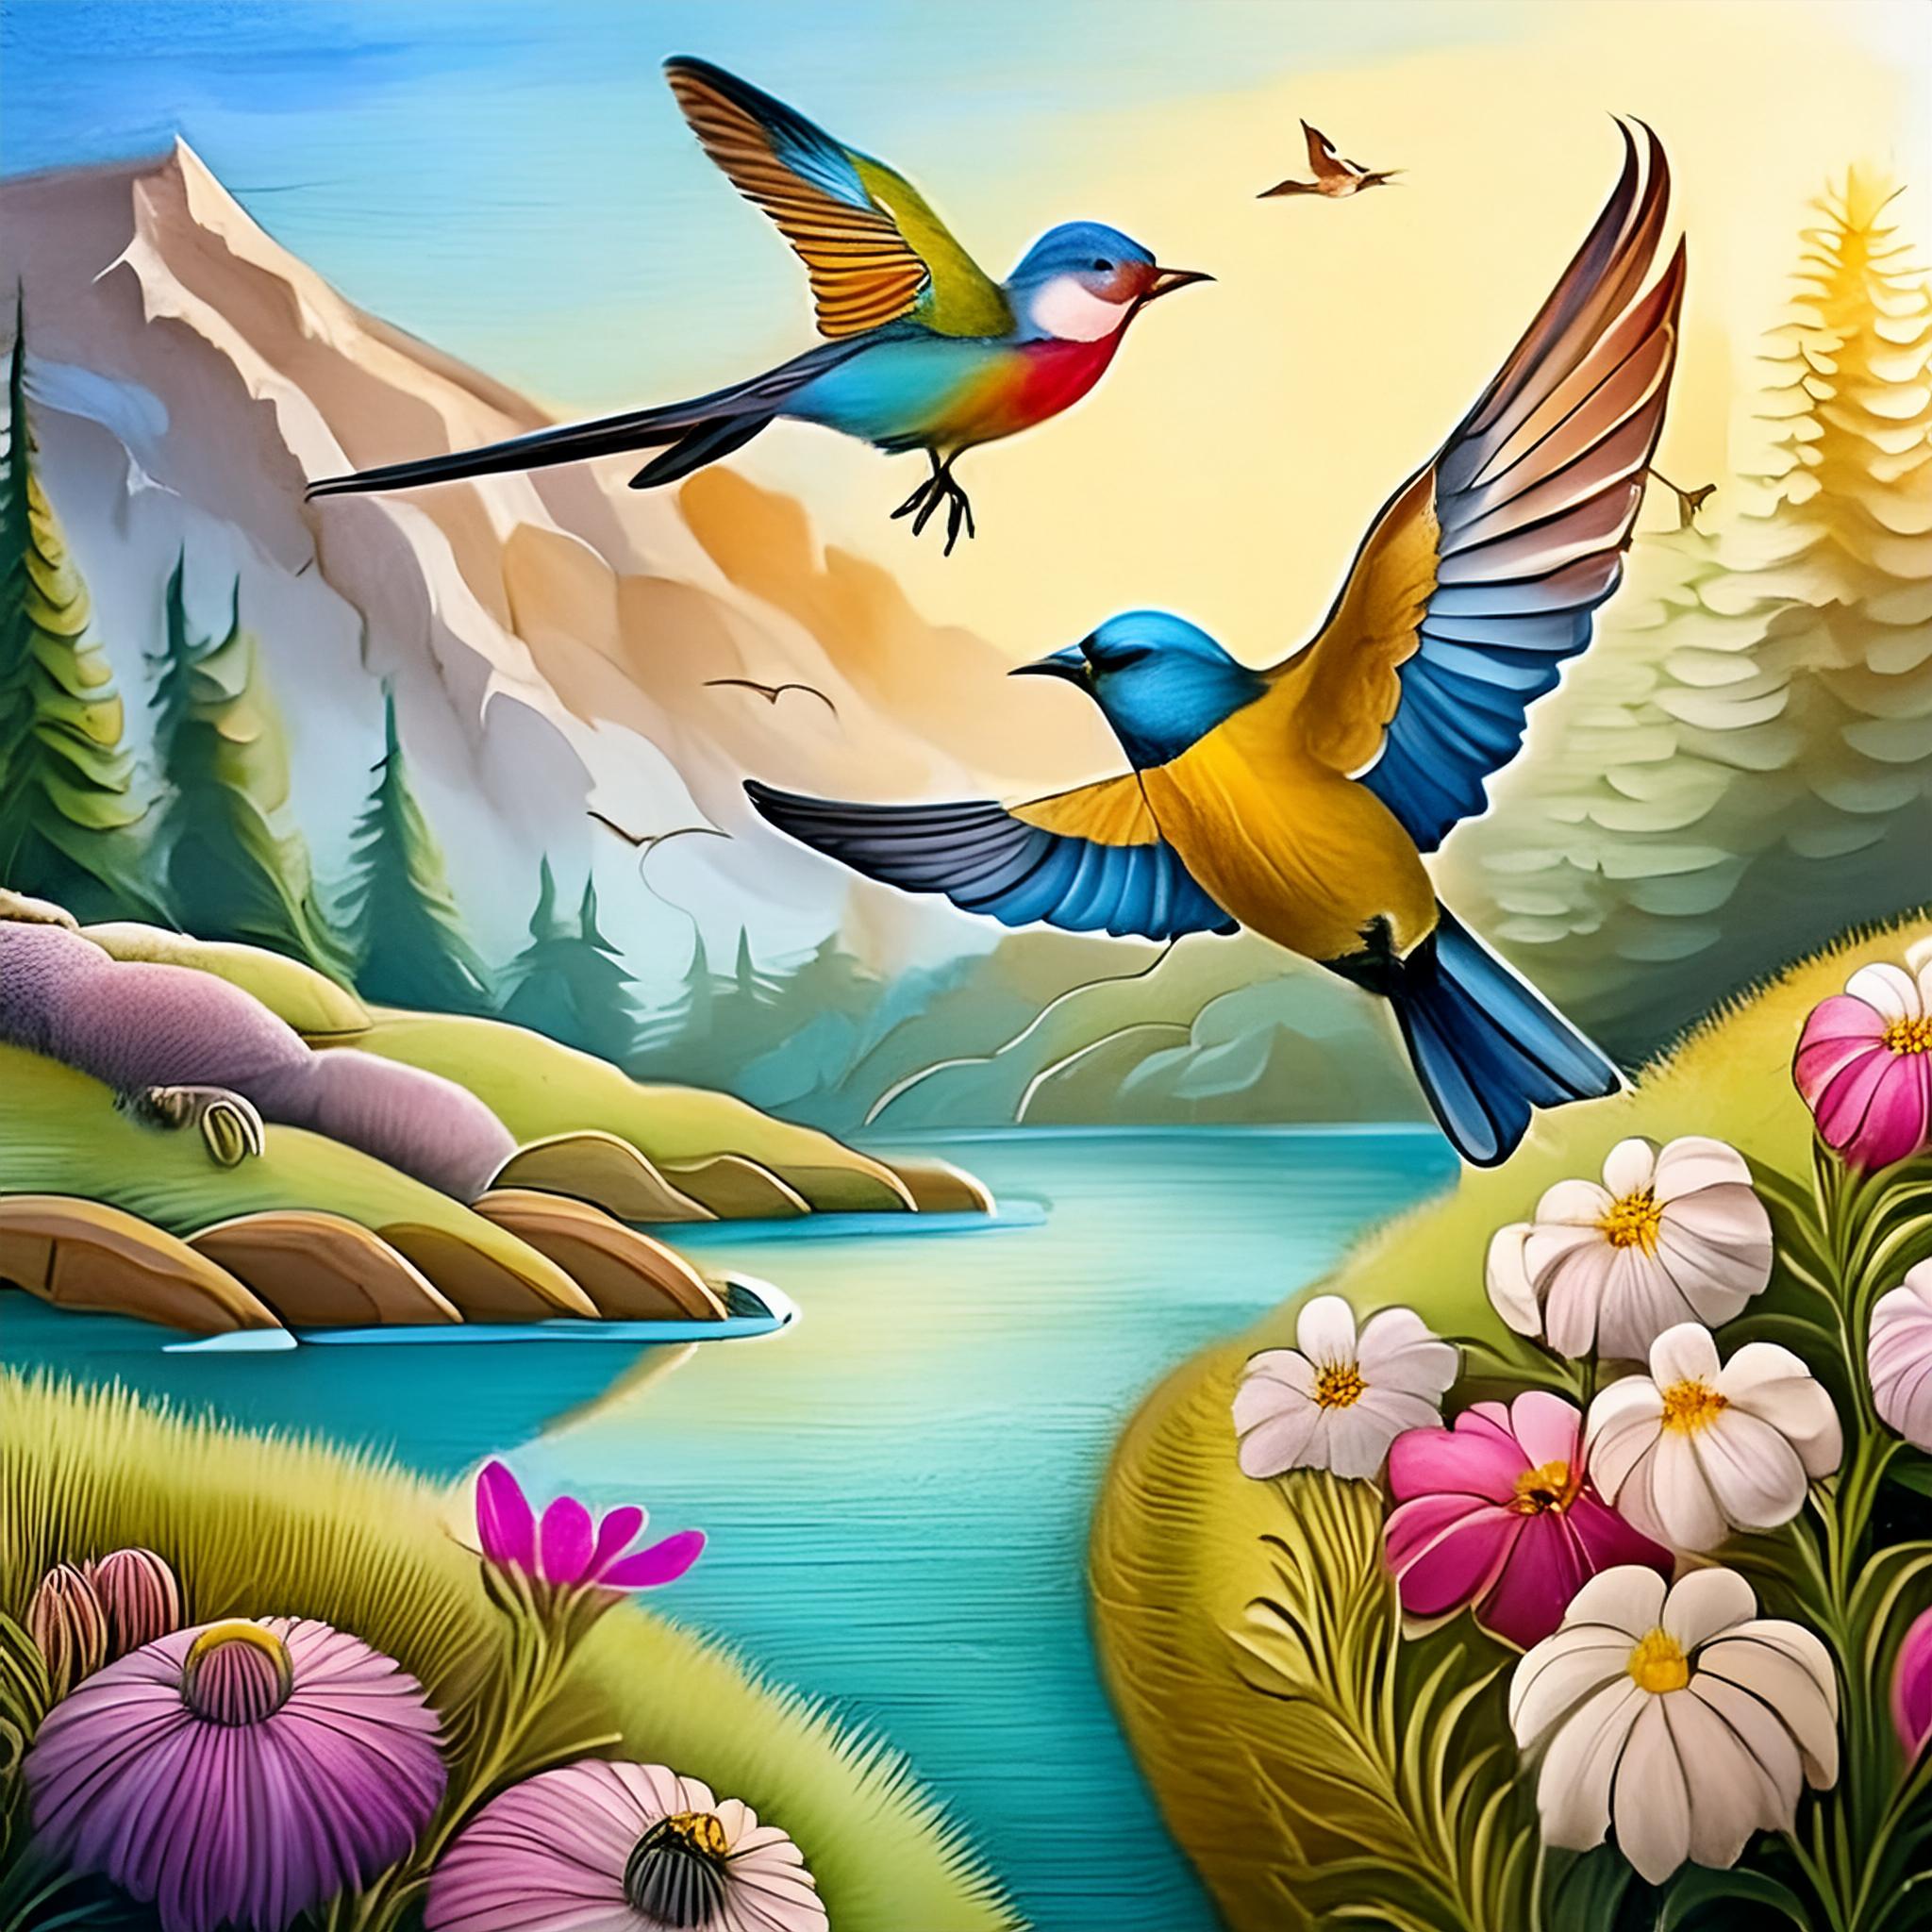 Firefly Beautiful colorful birds fly in the air above the beautiful landscape 41419.jpg